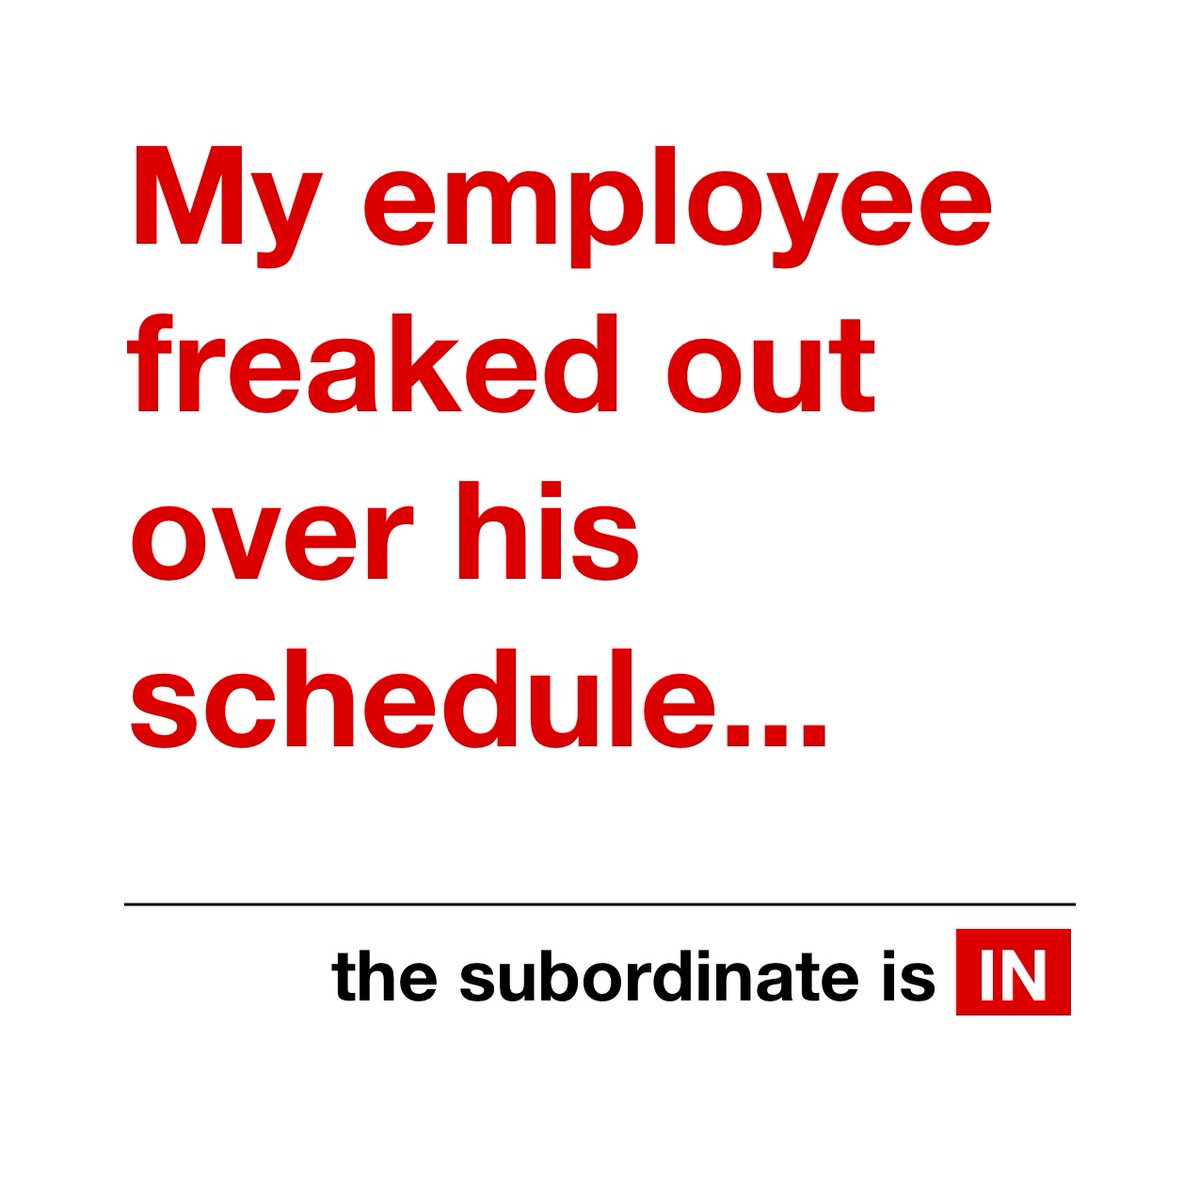 This week, an employee’s schedule gets messed up, and they come close to losing their sh...
#Businessadvice #JobAdvice #Management